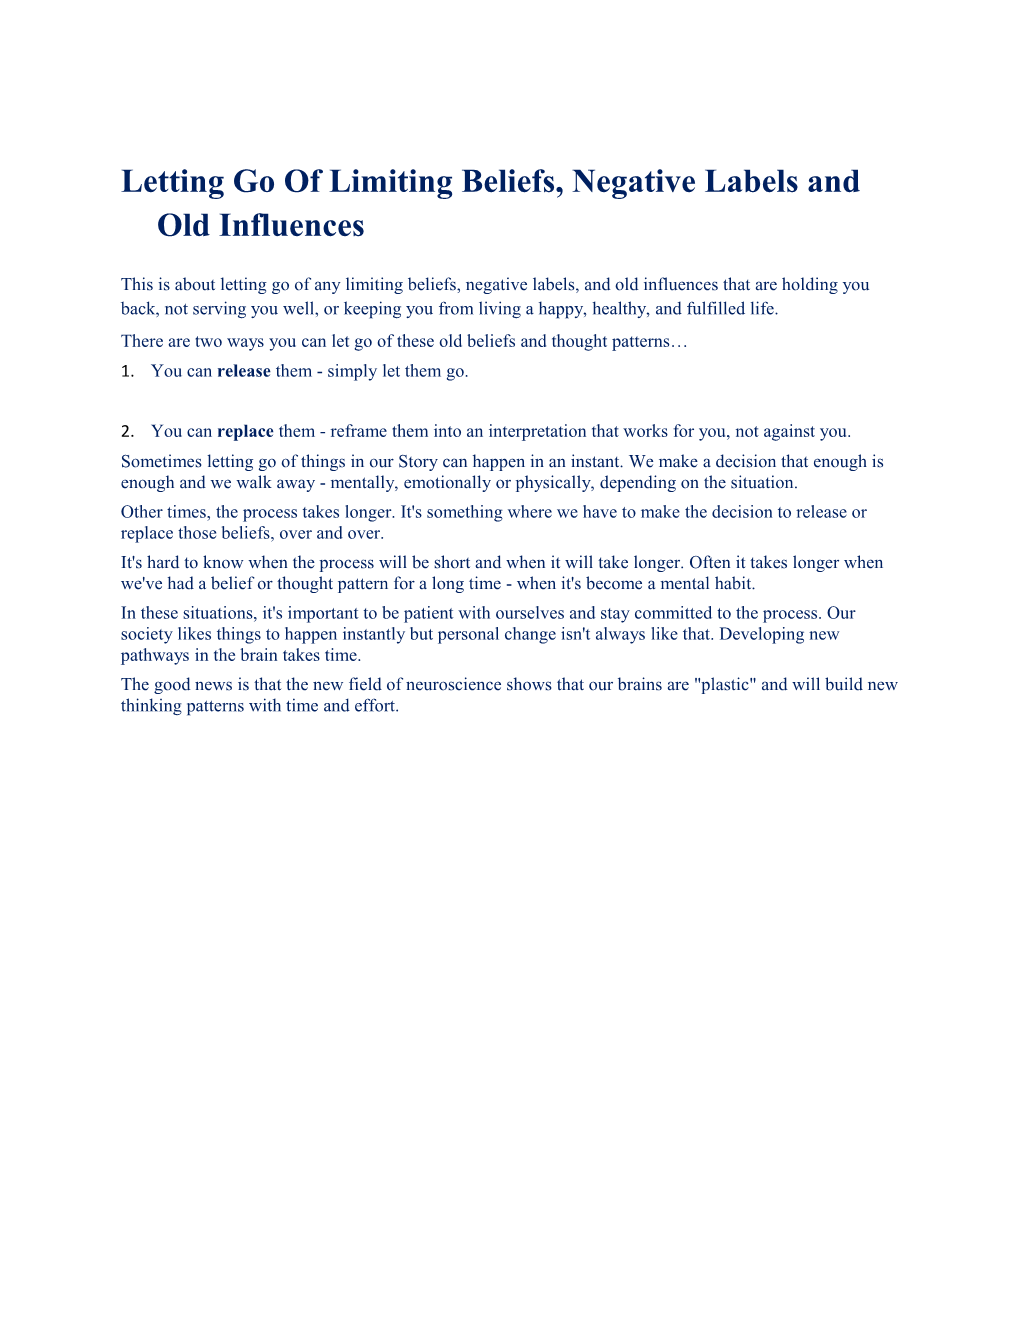 Letting Go of Limiting Beliefs, Negative Labels and Old Influences